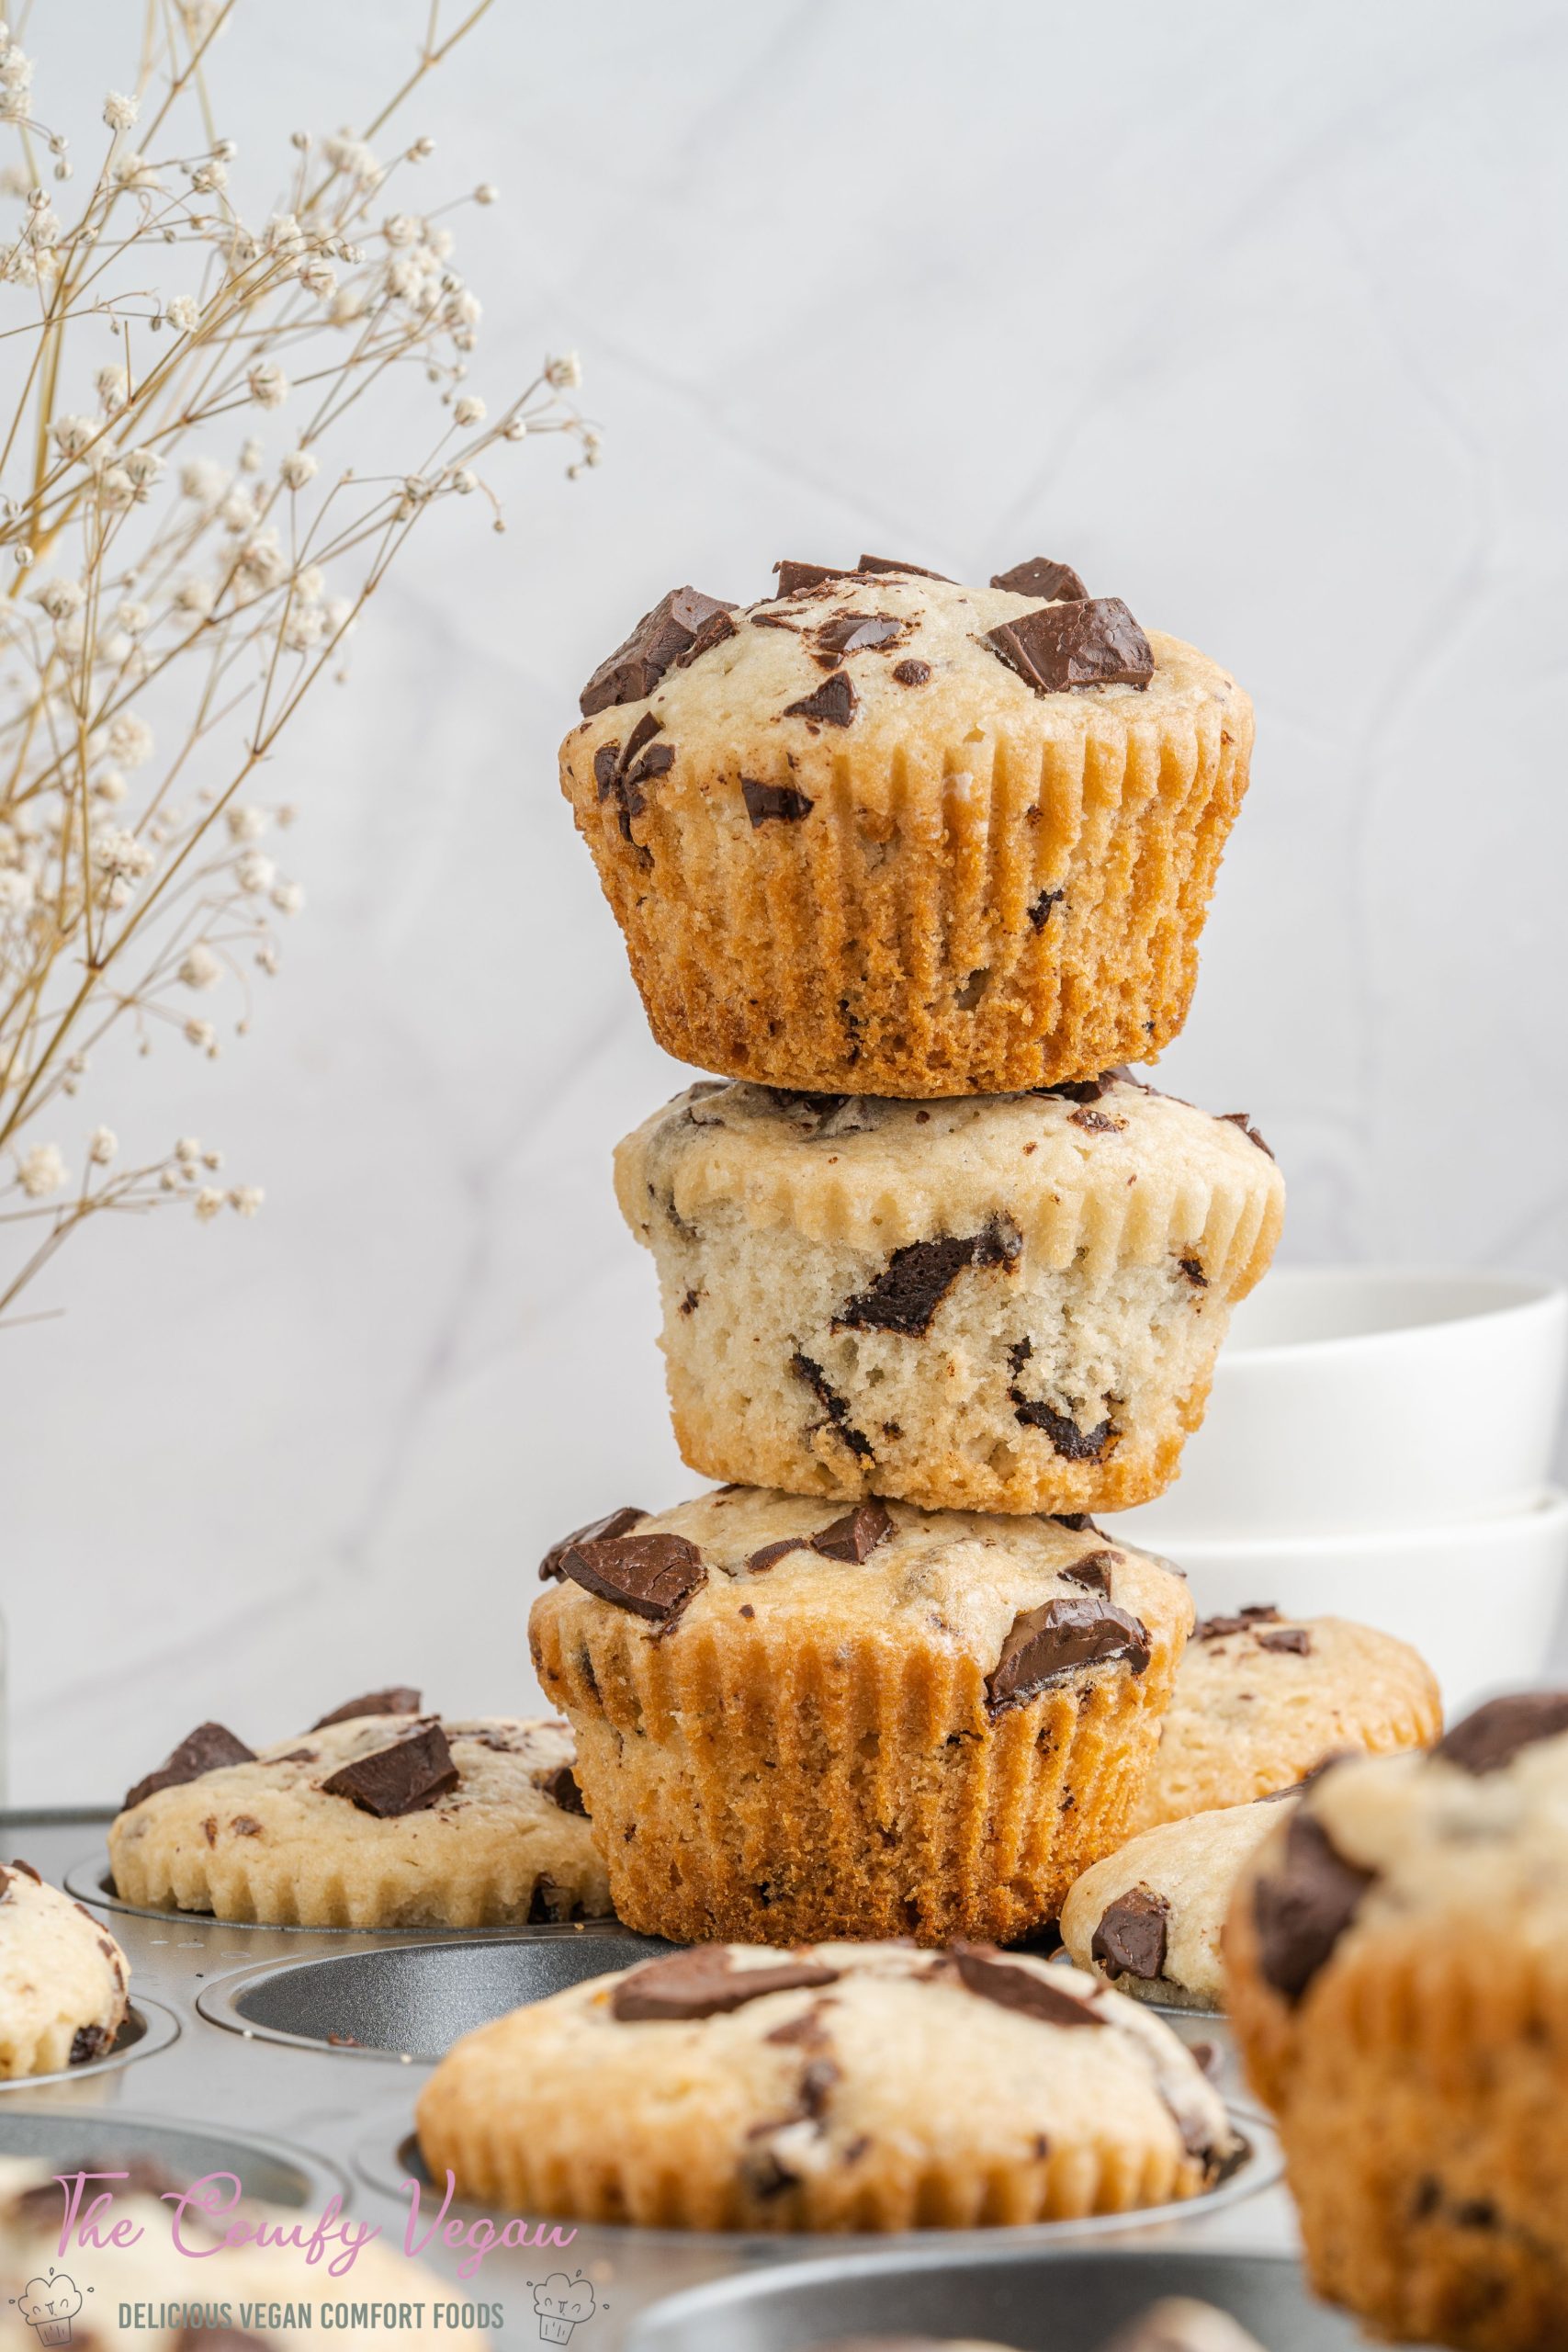 These Vegan Chocolate Chip Muffins are moist and soft on the inside. Made with common vegan pantry staples they're so easy to make. They're sweet, with a bold vanilla and chocolate flavor. Great as a snack or with coffee.